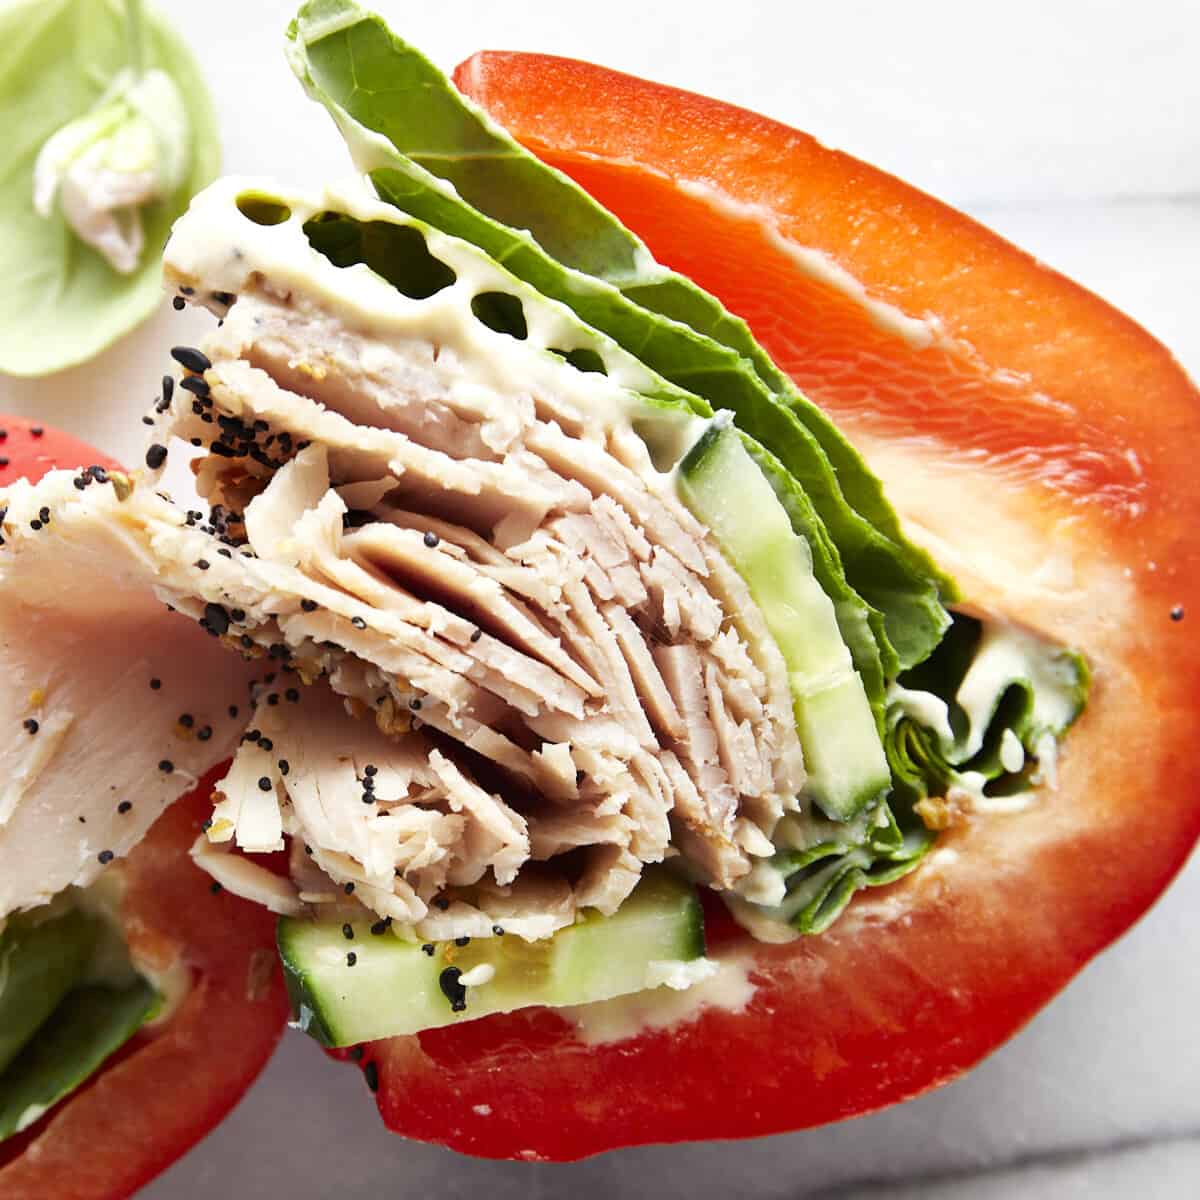 Two halves of a sliced low-carb turkey bell pepper sandwich.